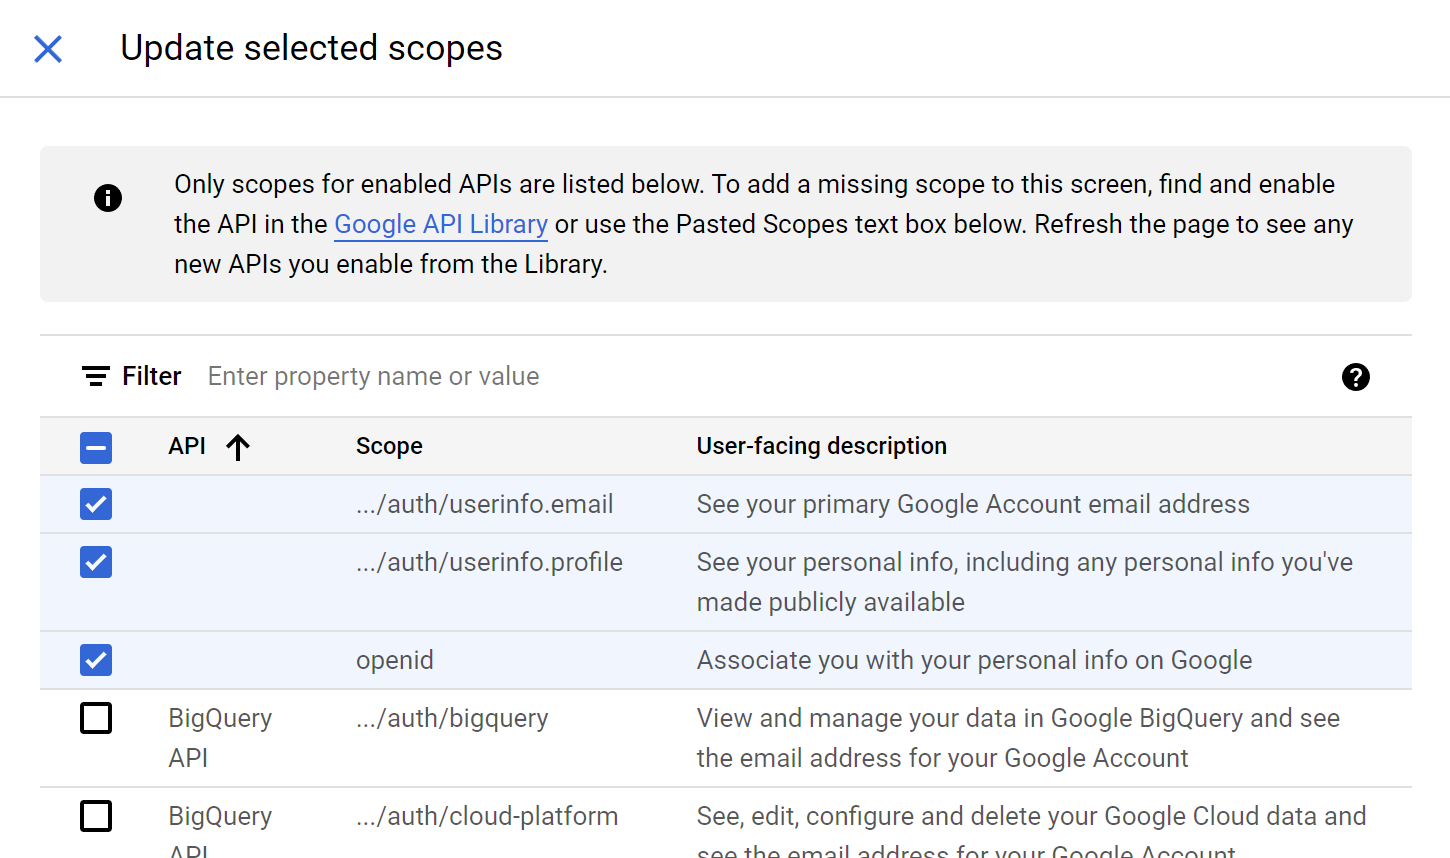 Select these three scopes in Add/Update scopes pane